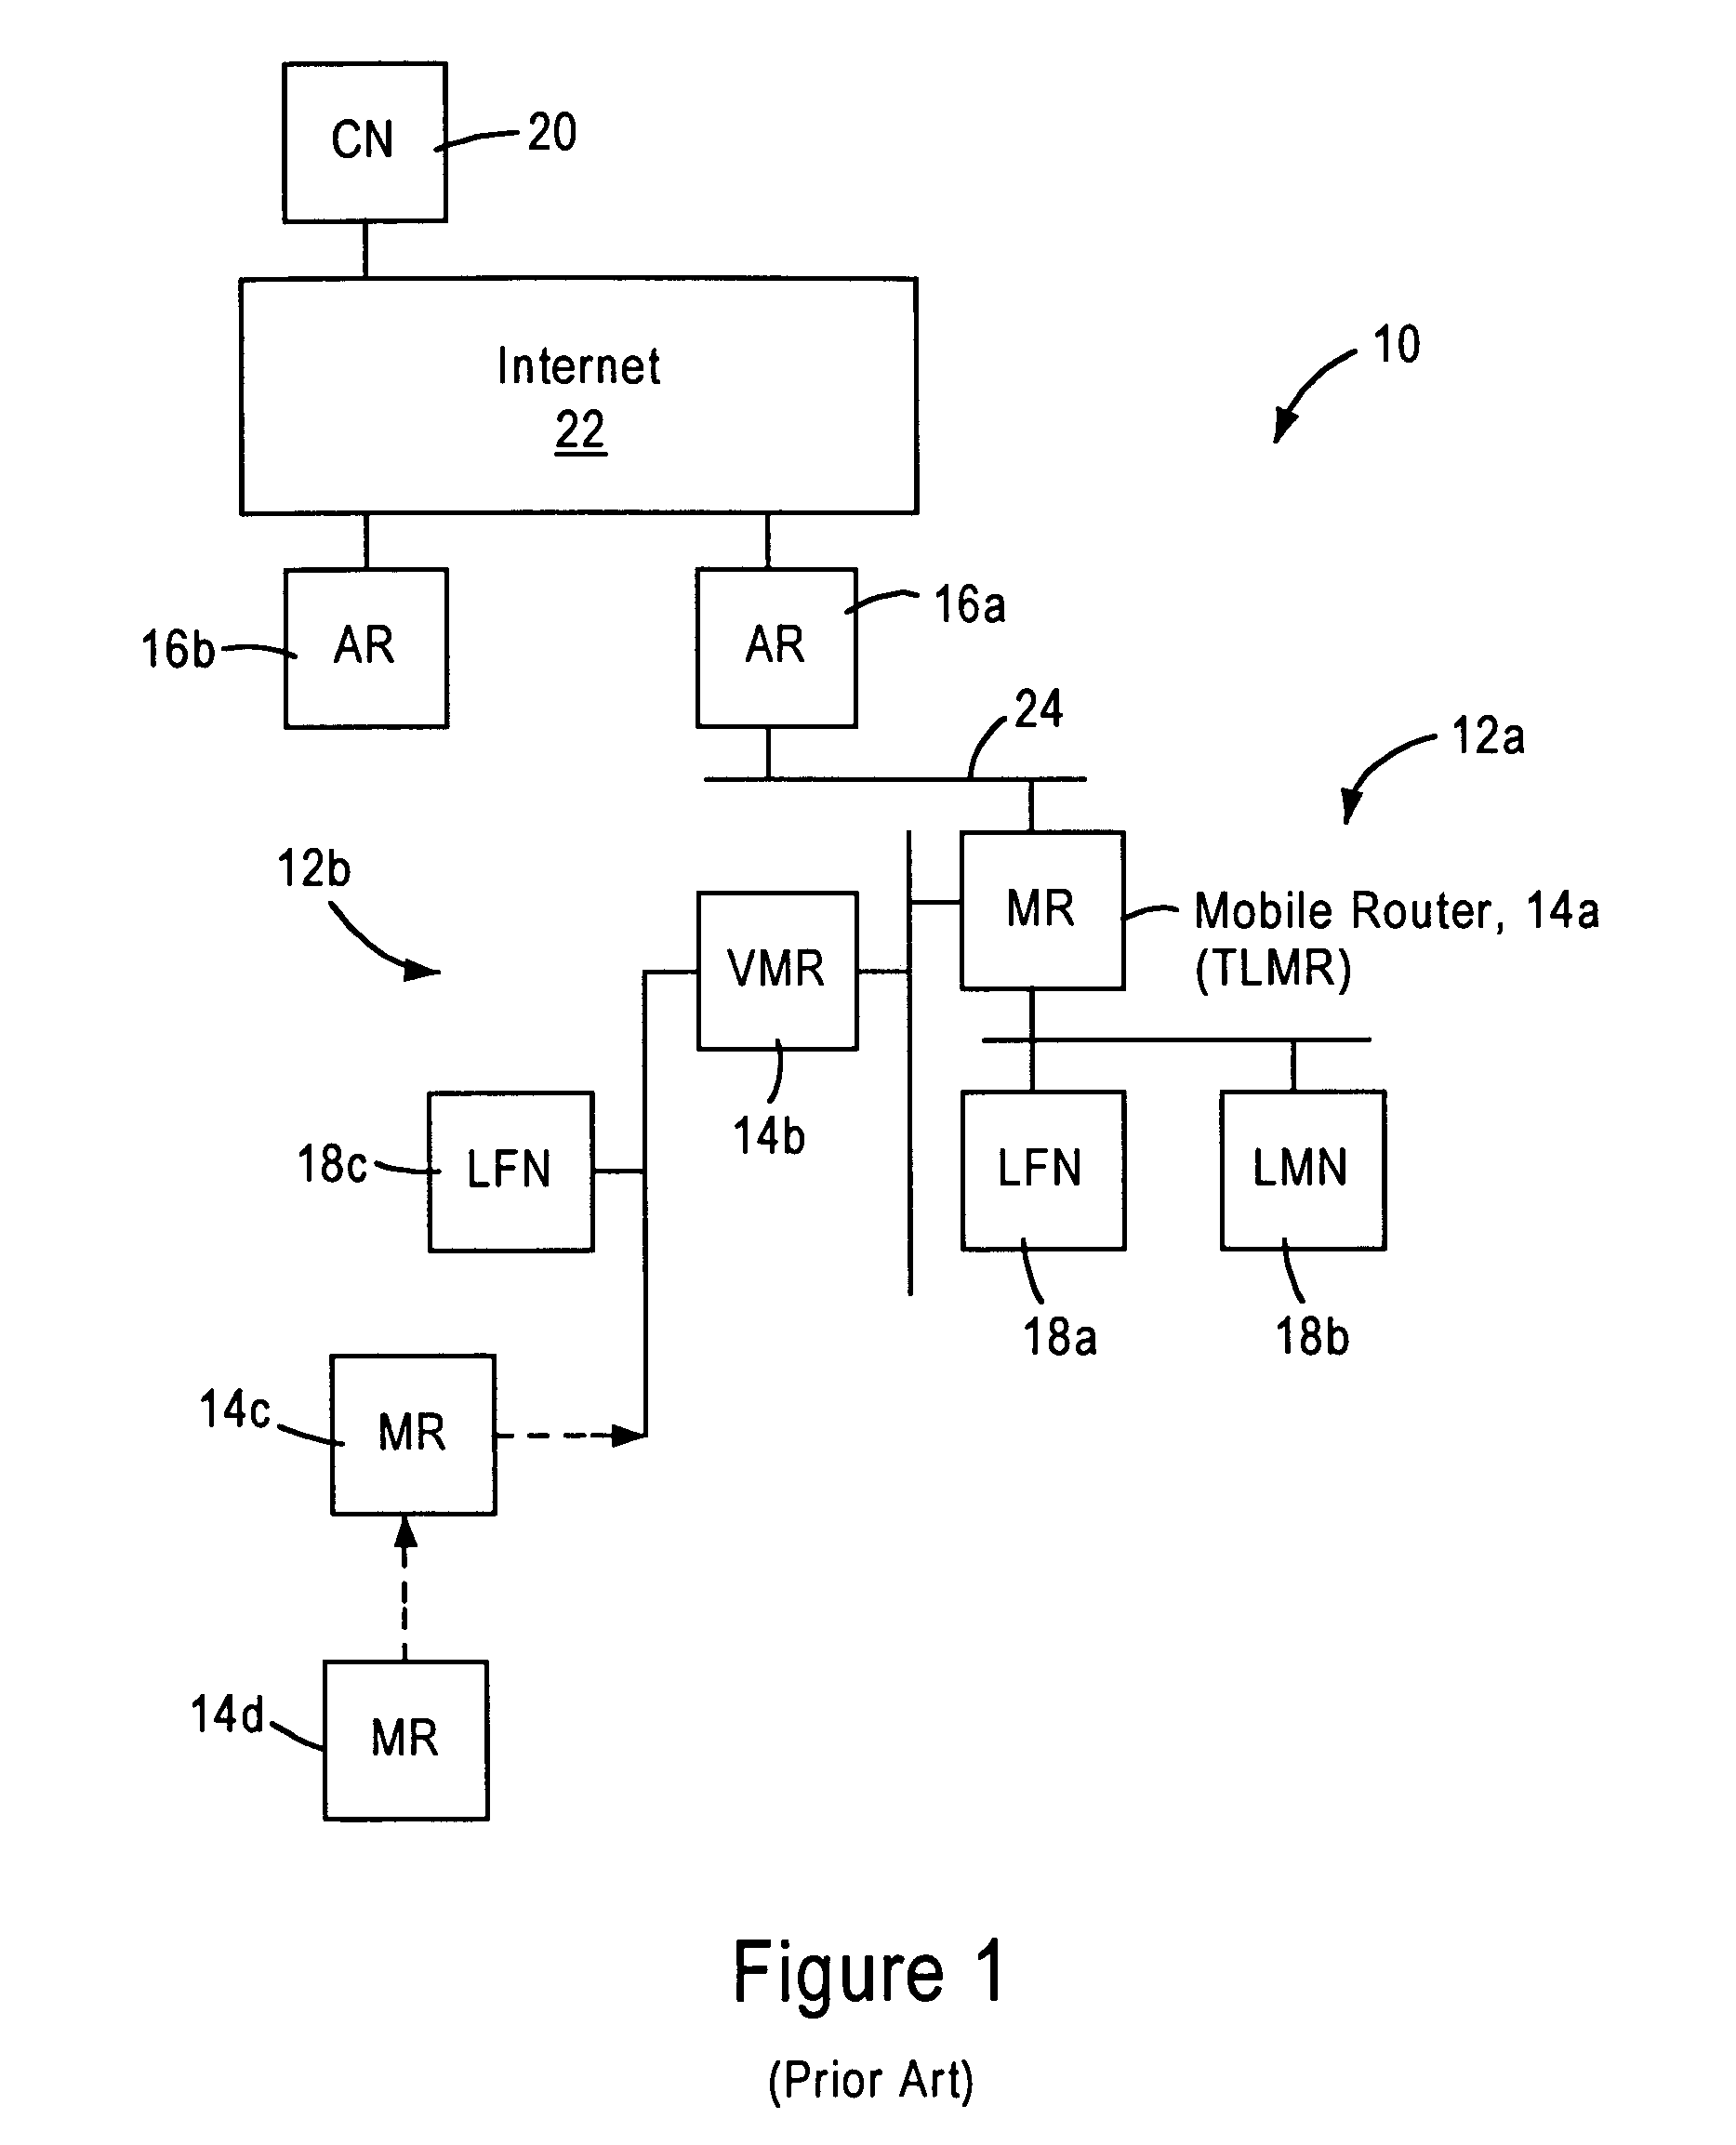 Arrangement for router attachments between roaming mobile routers in a mobile network